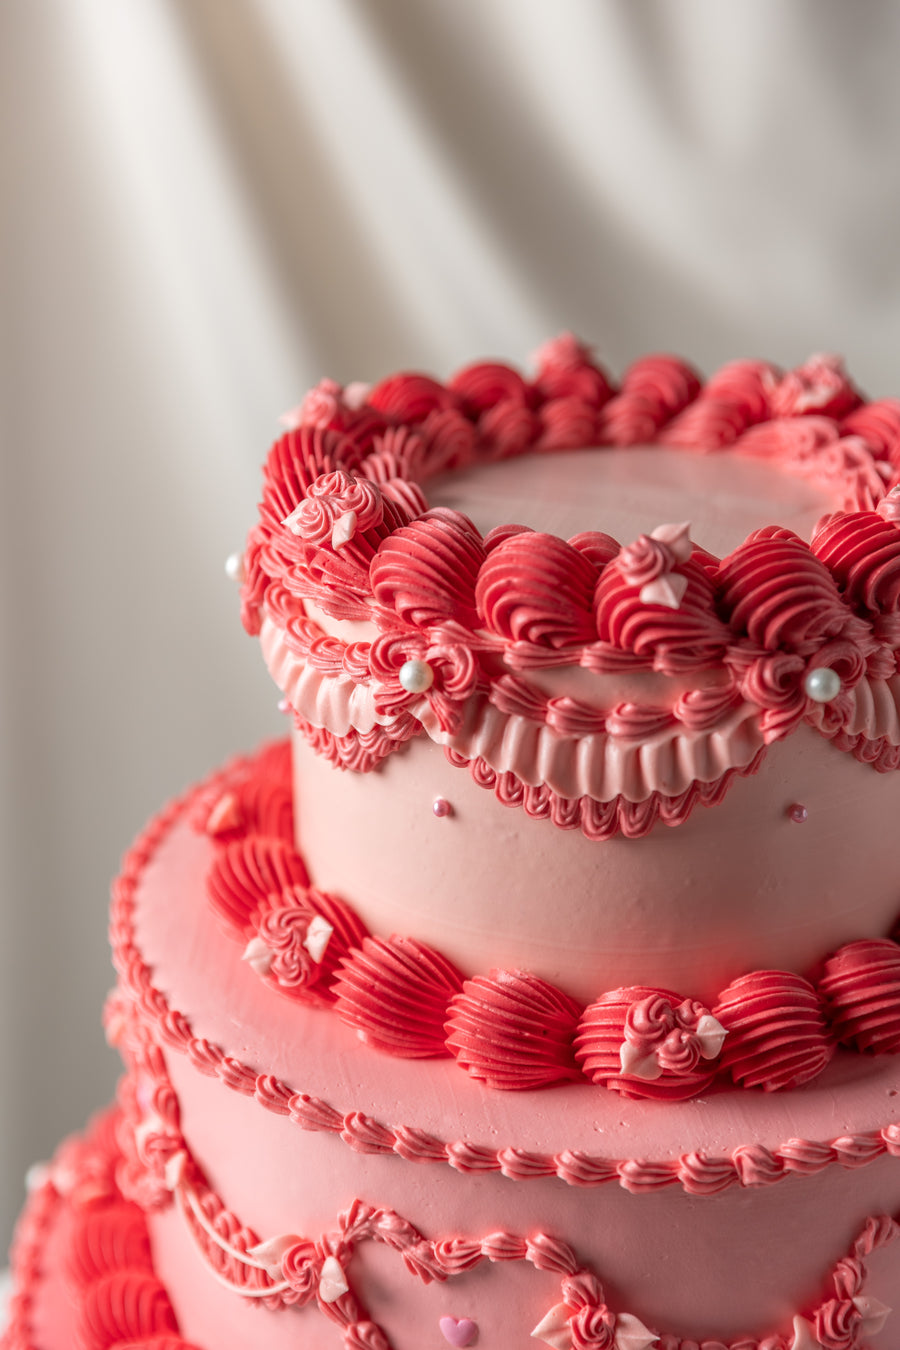 5 Cakes by Roxy Mankoo